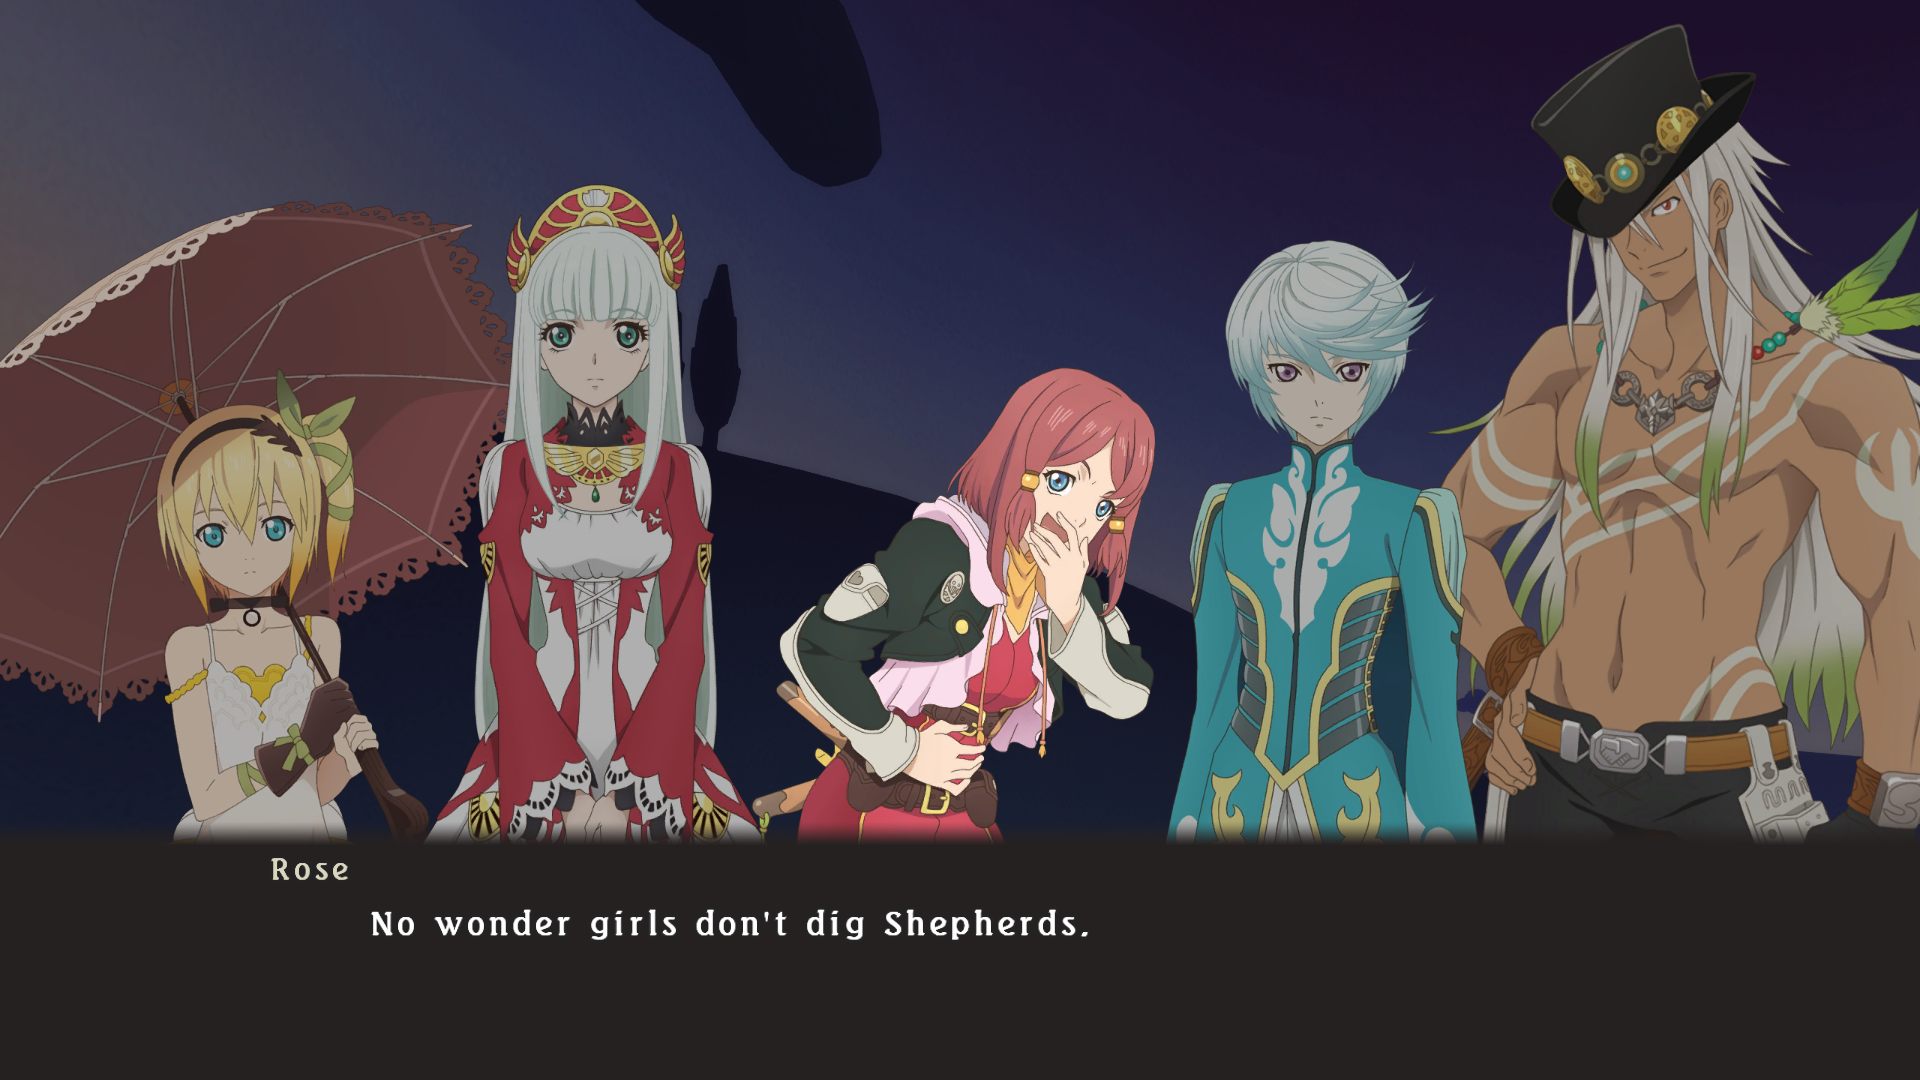 Review: Tales of Zestiria the X, Episode 7: Each One's Feelings - Geeks  Under Grace